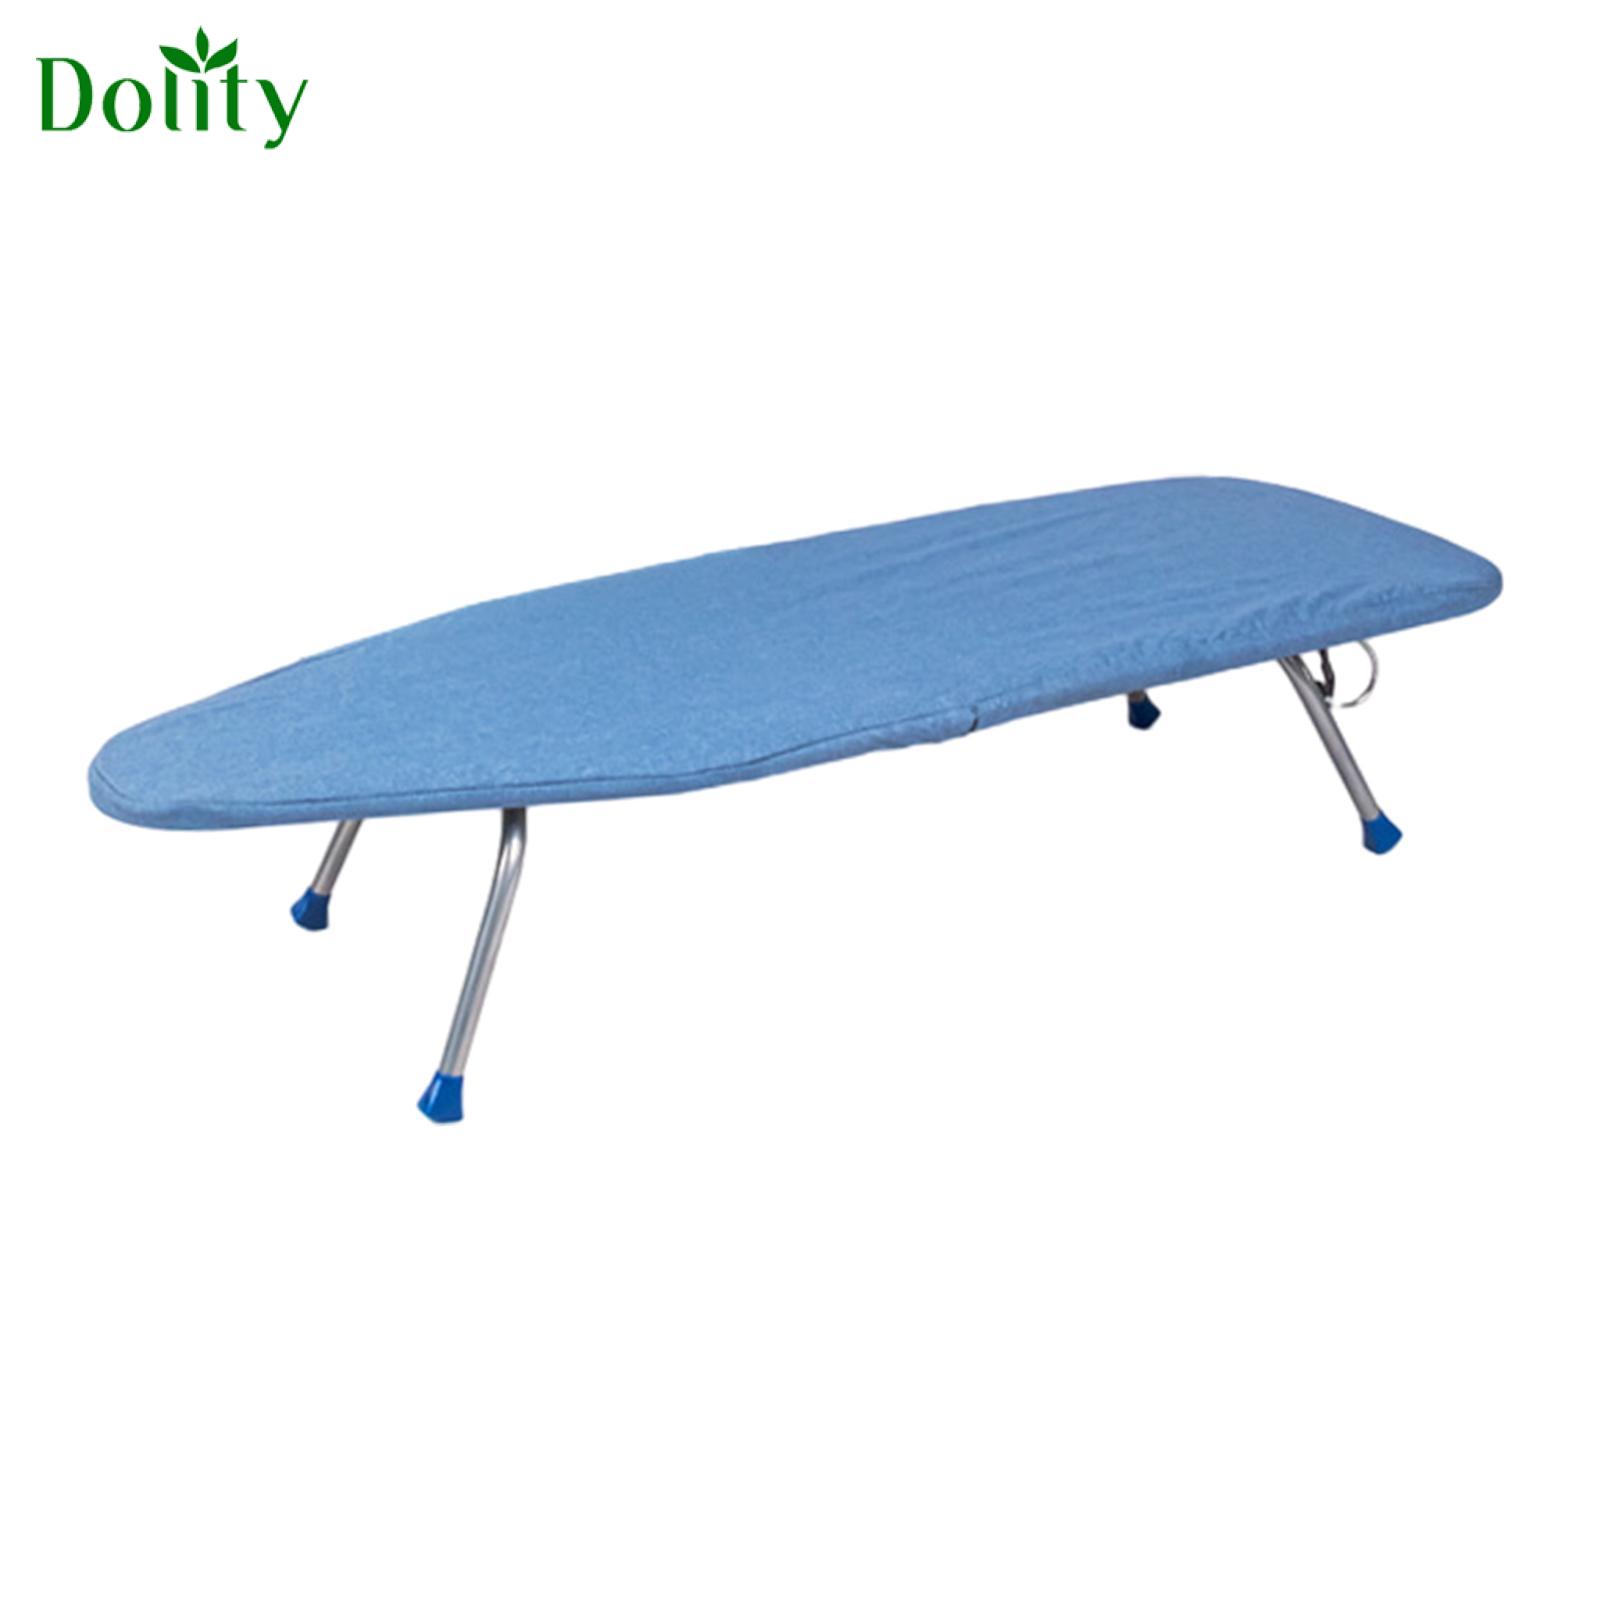 Dolity Tabletop Ironing Board Portable Small Iron Board for Household